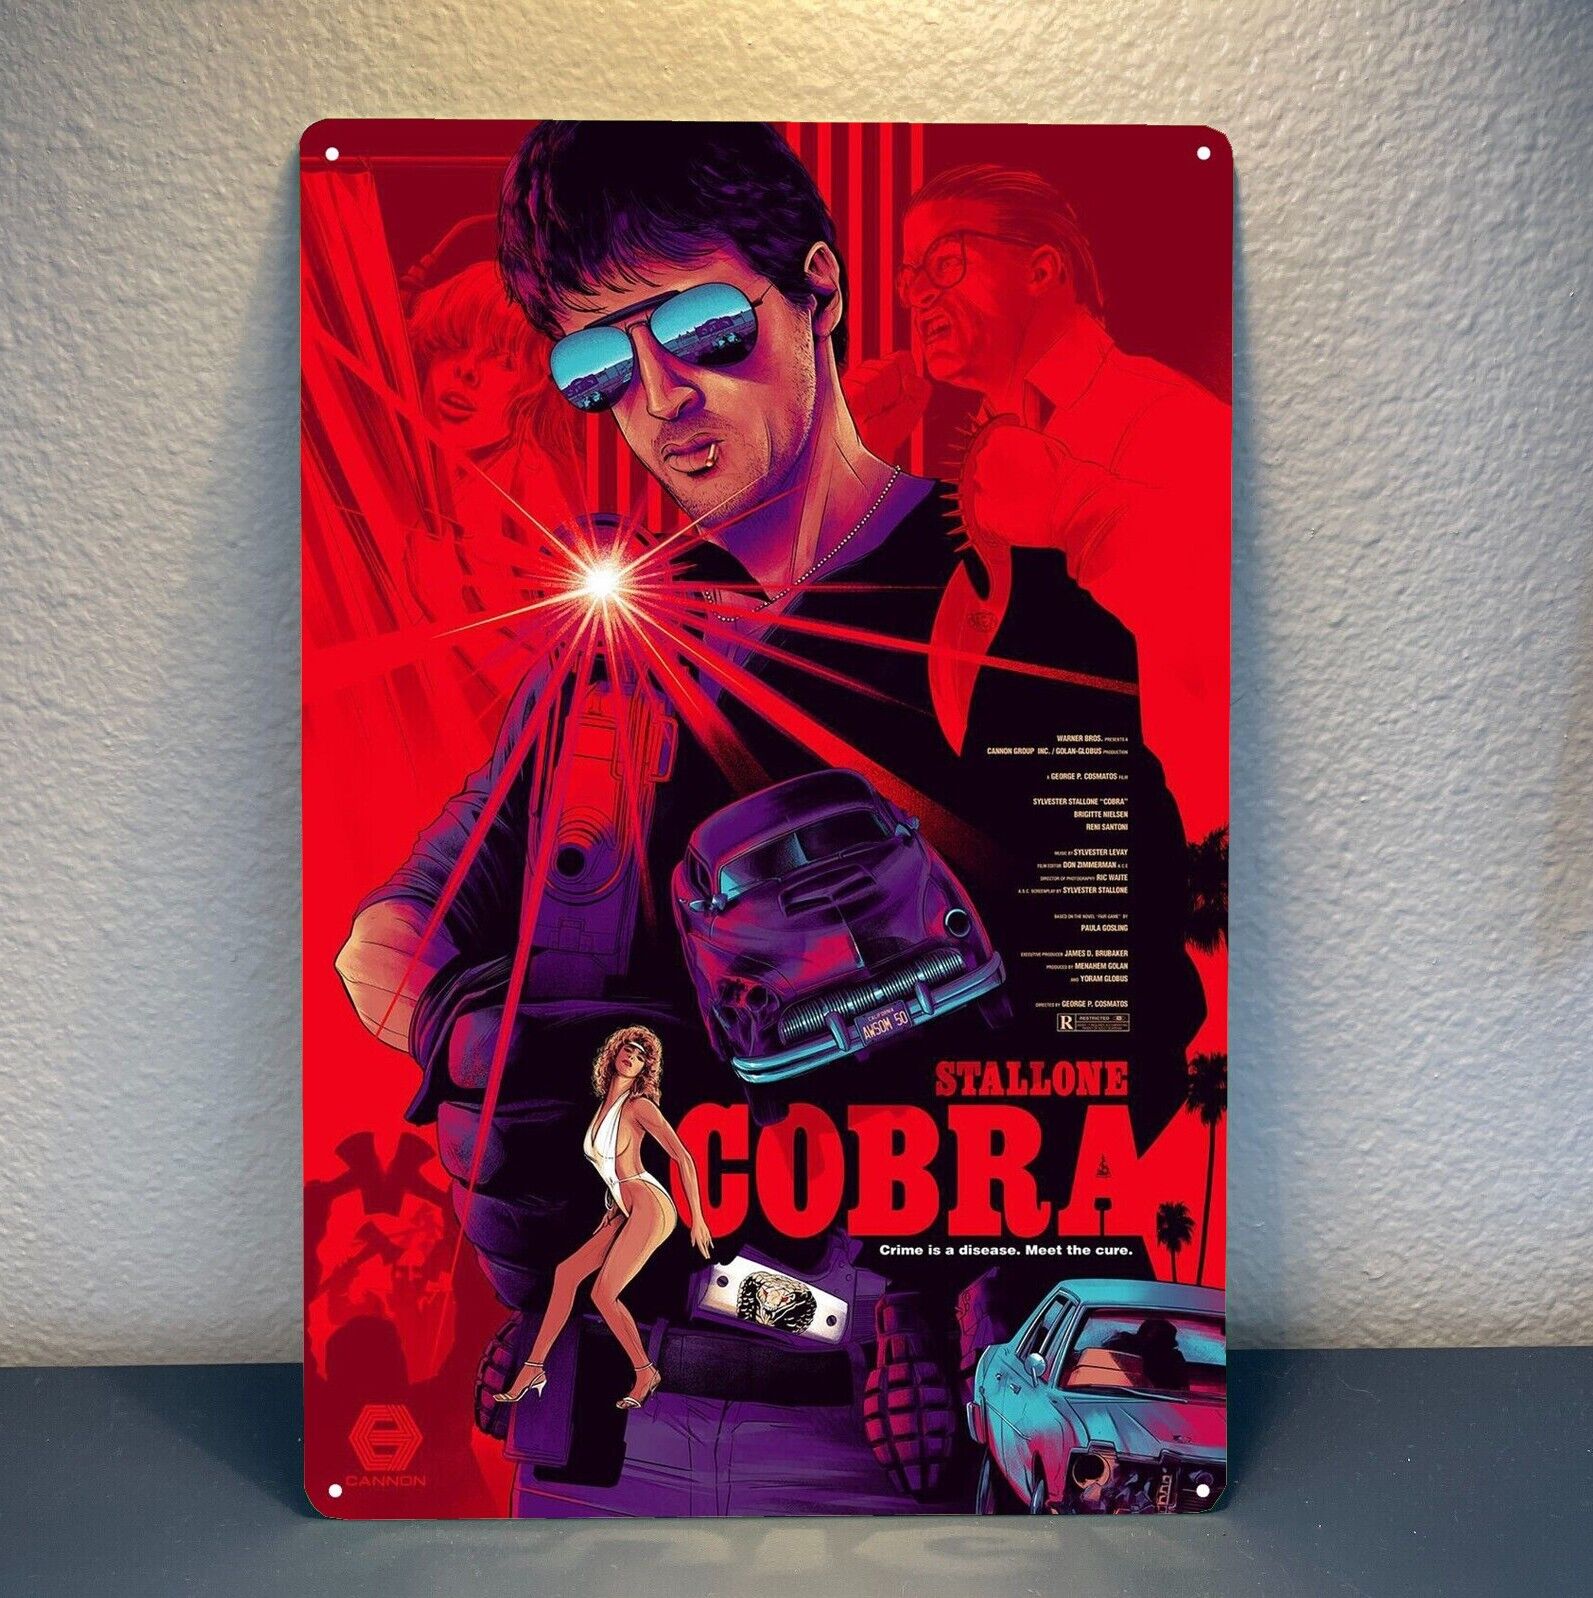 Cobra sylvester stallone Movie Metal Poster Tin Sign 20x30cm Collectable Plate